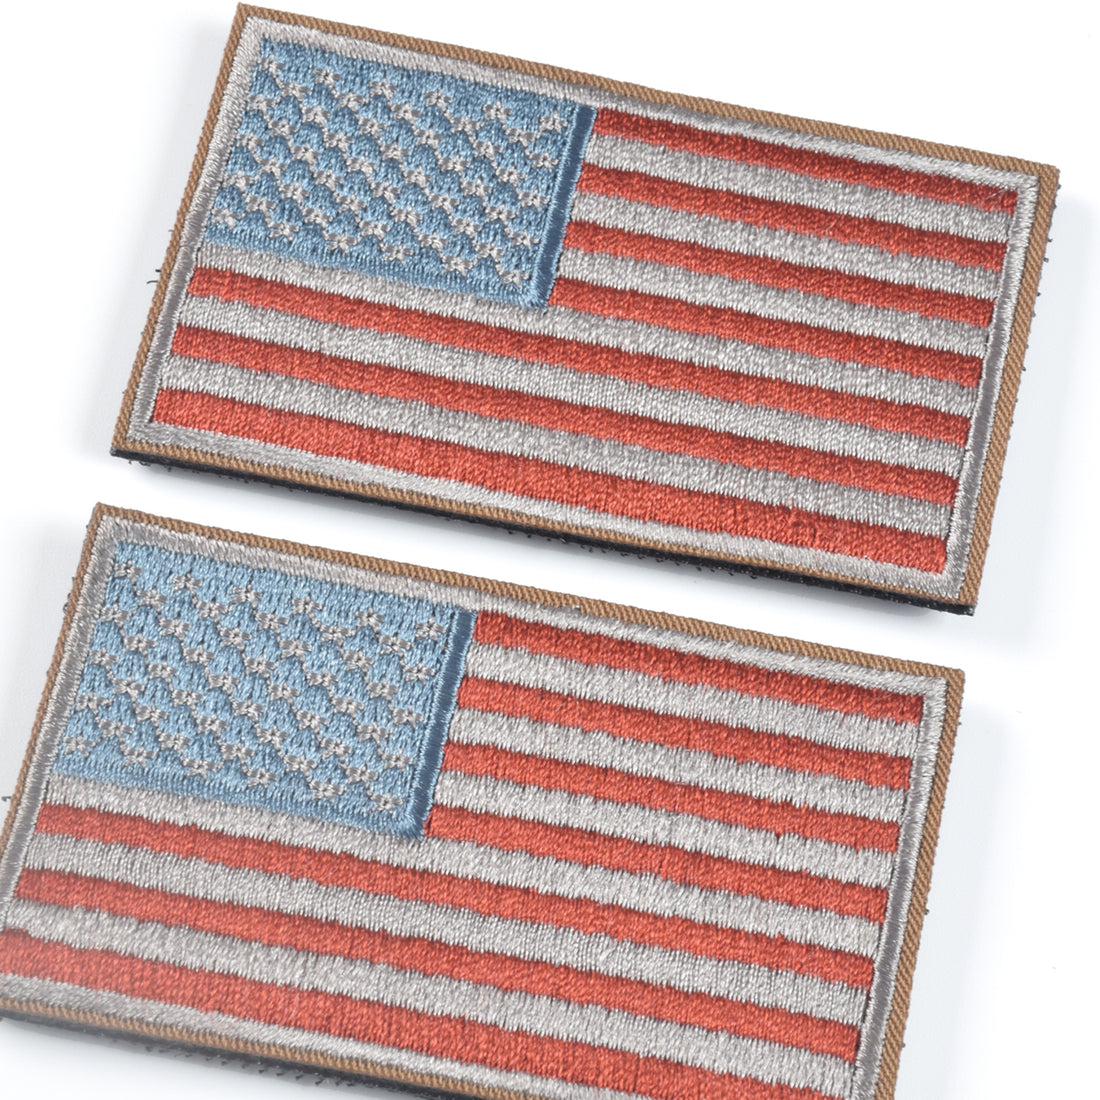  2 Pieces Tactical USA Flag Patch -Black & Gray